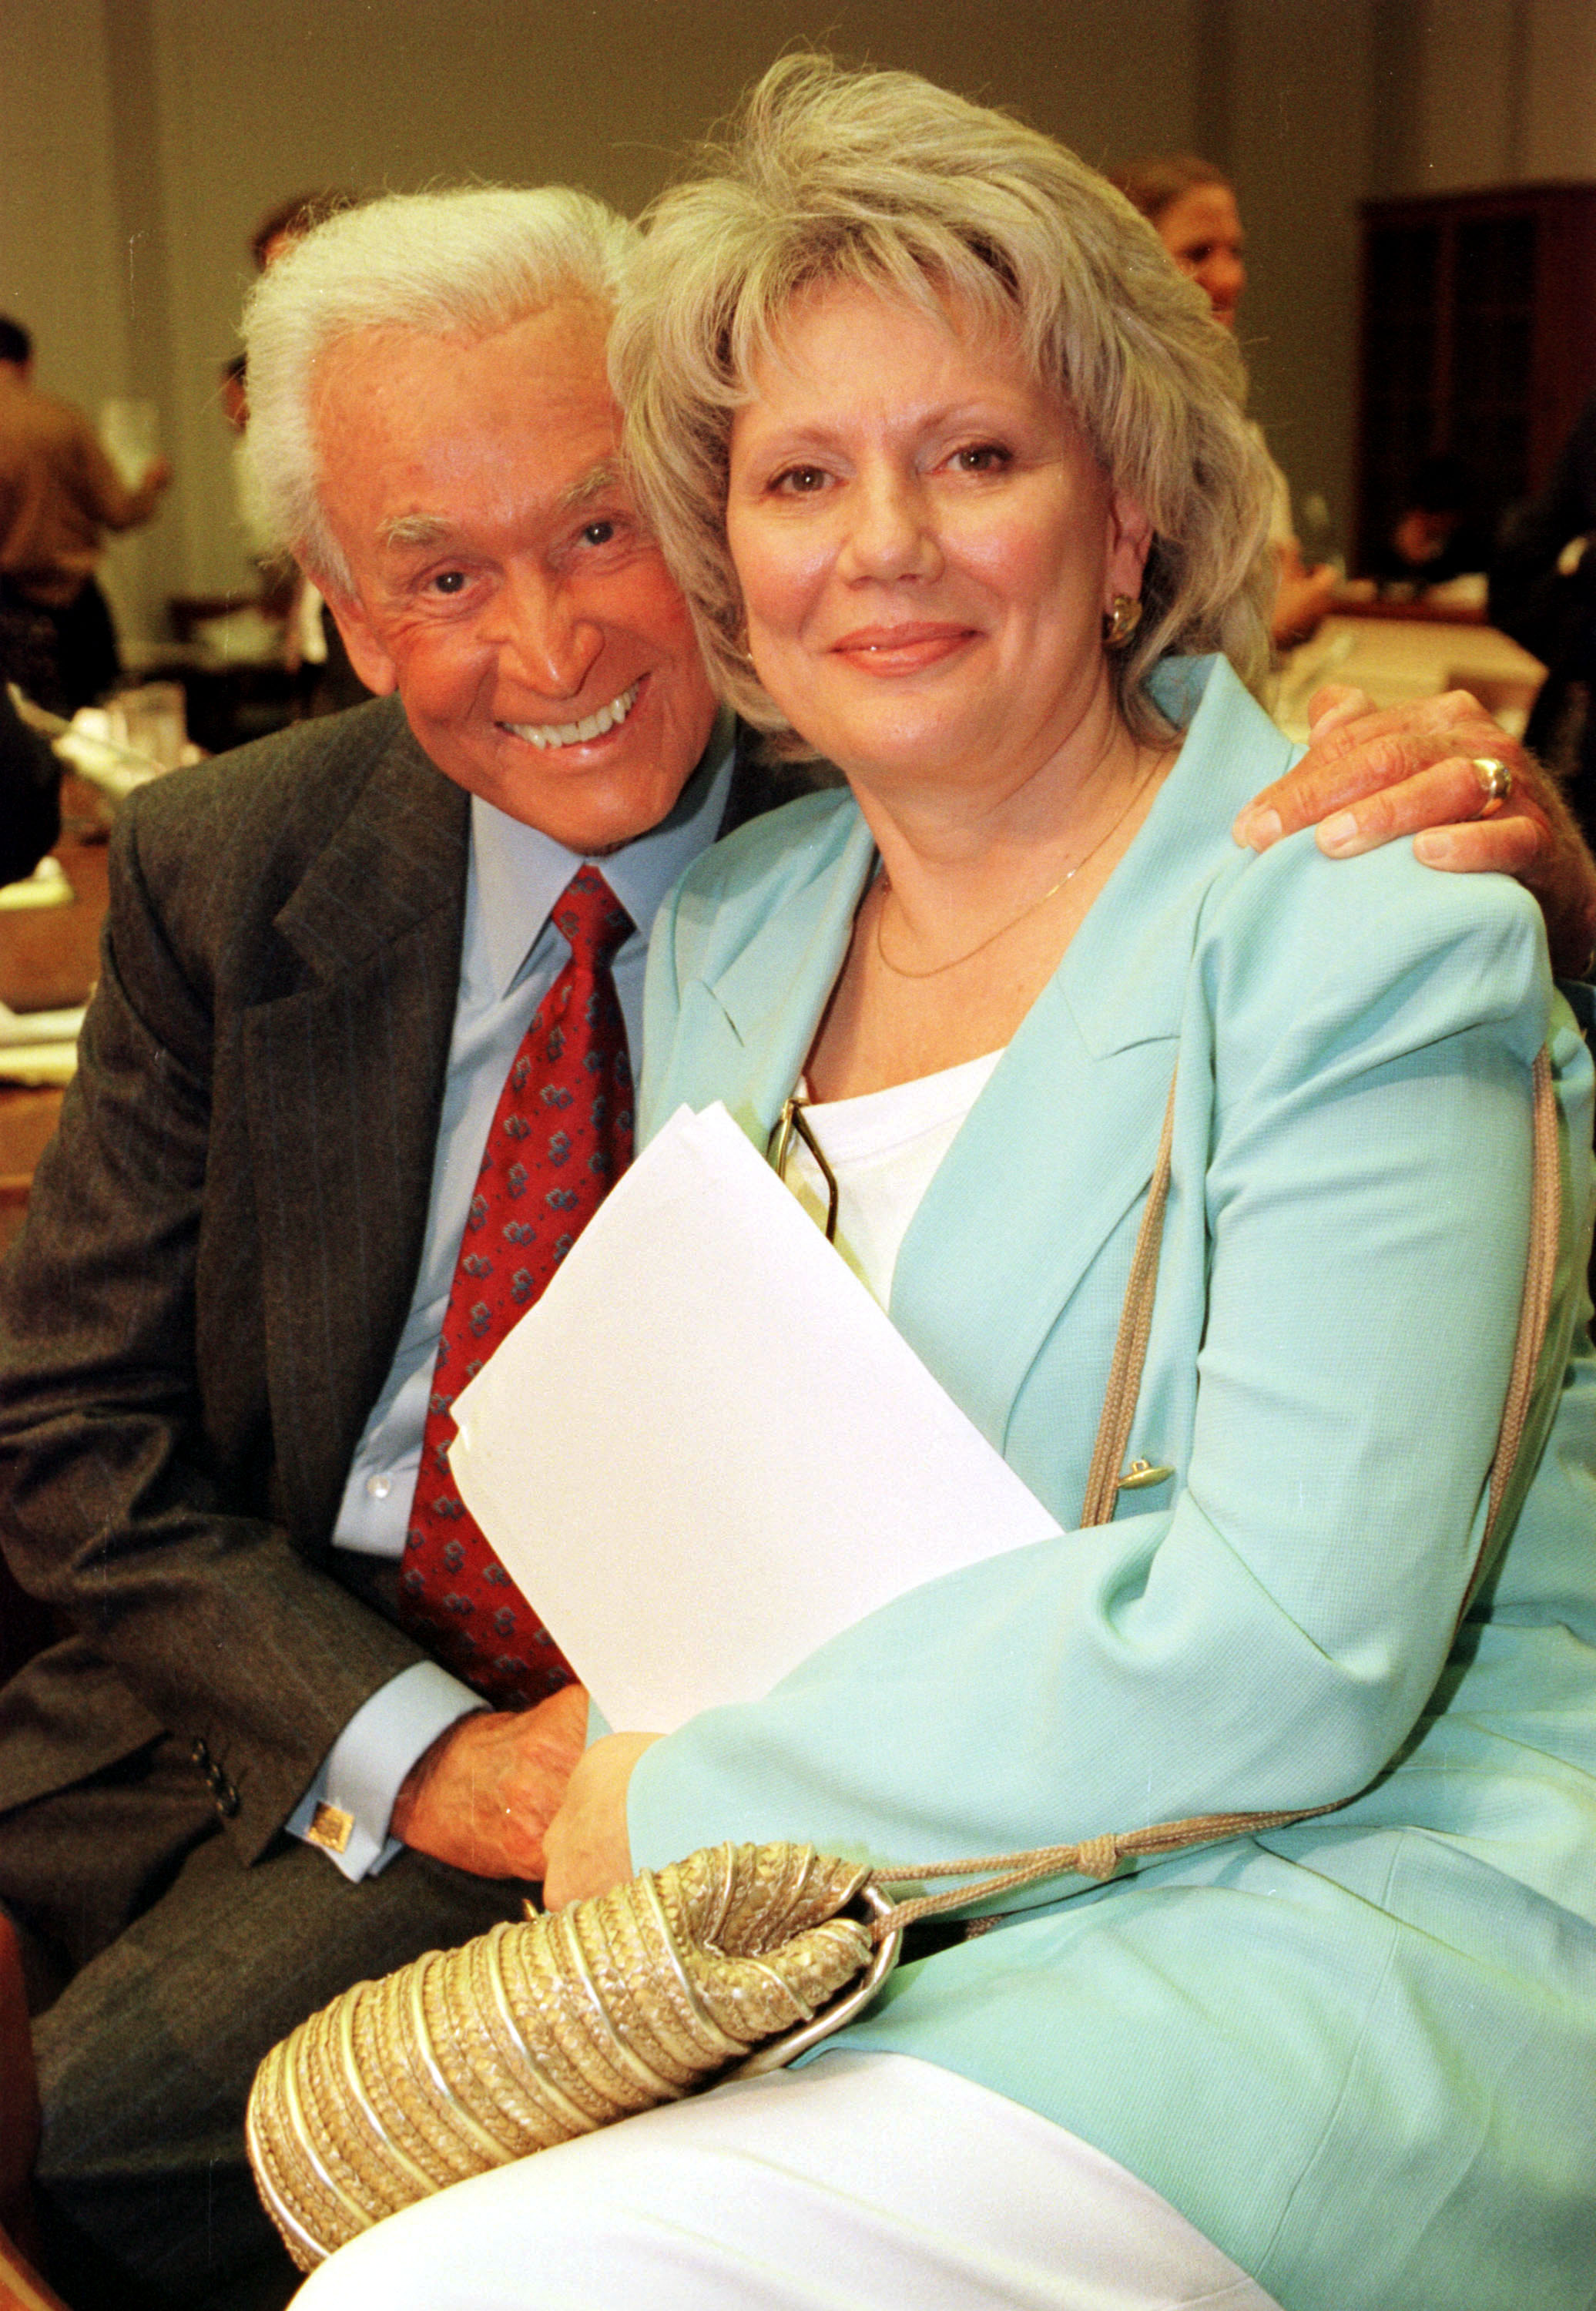 Bob Barker, left, poses for photographers with Nancy Burnet, Director of United Activists for Animal Rights after a hearing on the "Captive Elephant Accident Prevention Act of 1999" on Capitol Hill, June 13, 2000 in Washington. | Source: Getty Images